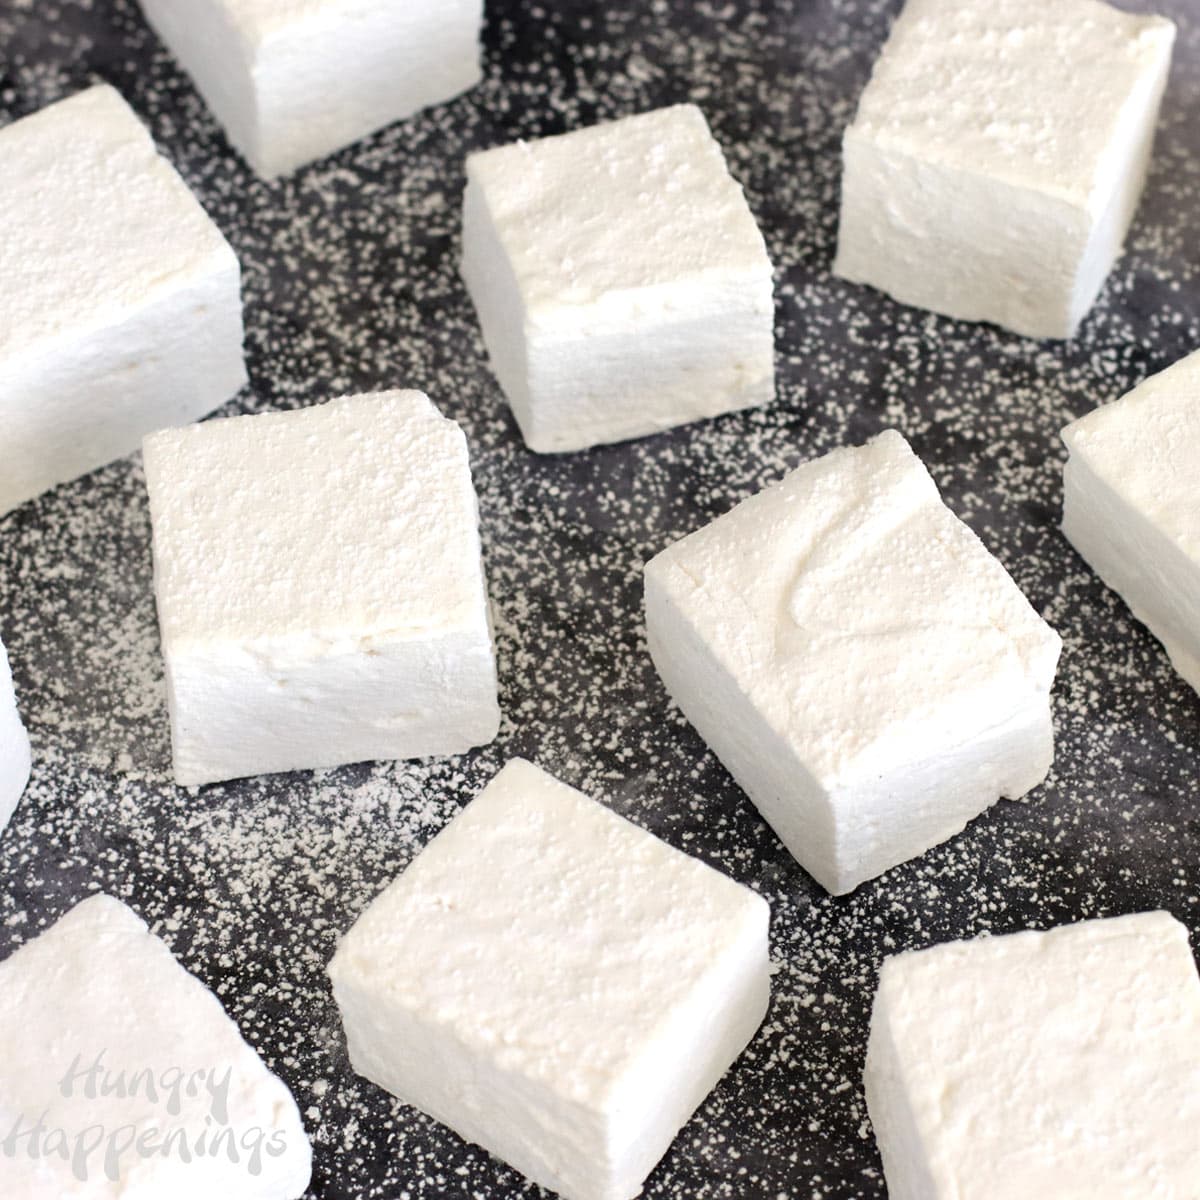 Billowy soft homemade marshmallows are dusted with a blend of powdered sugar and corn starch to keep them from sticking to each other.